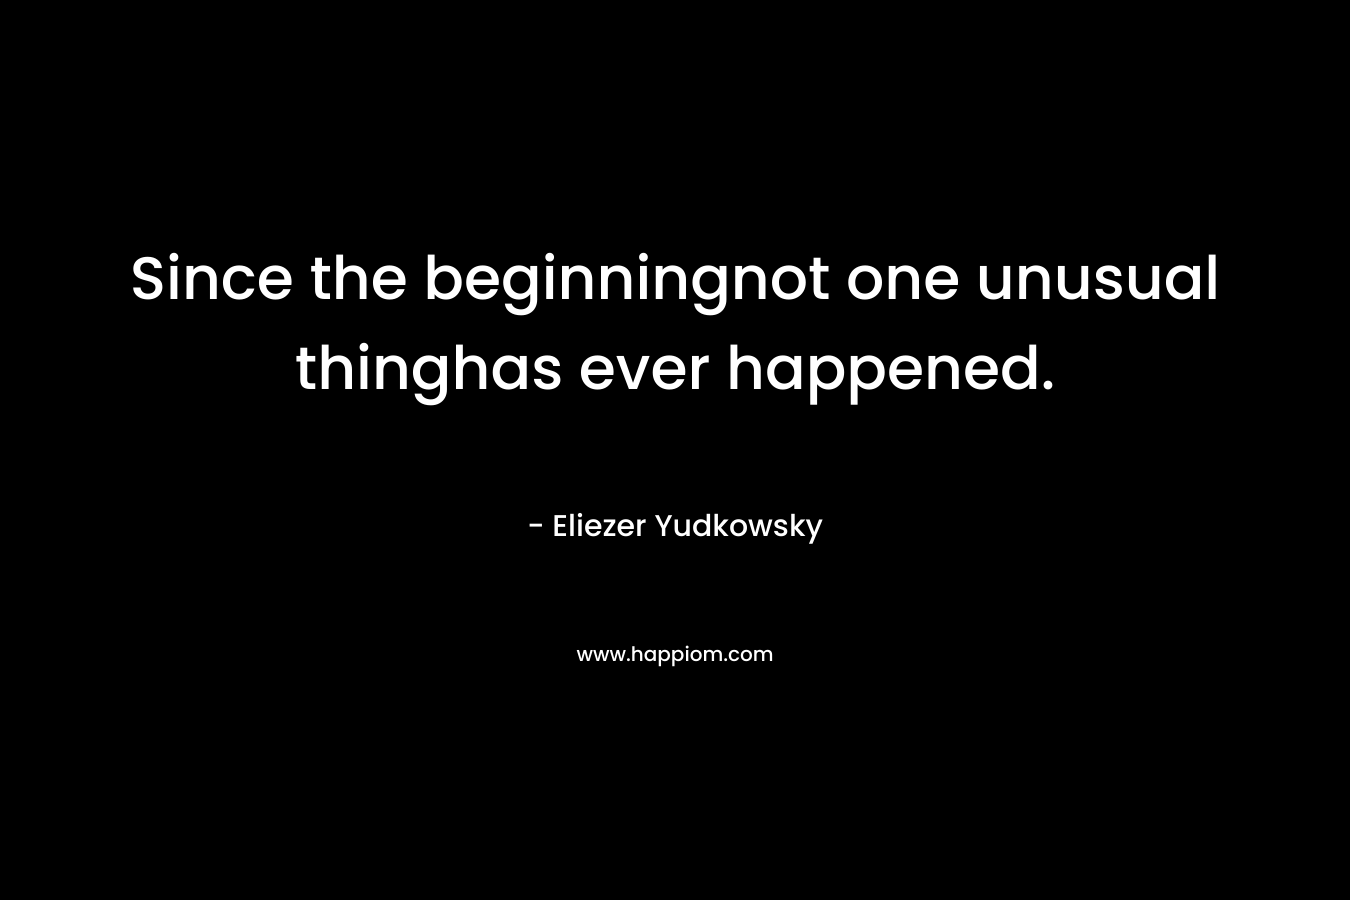 Since the beginningnot one unusual thinghas ever happened. – Eliezer Yudkowsky